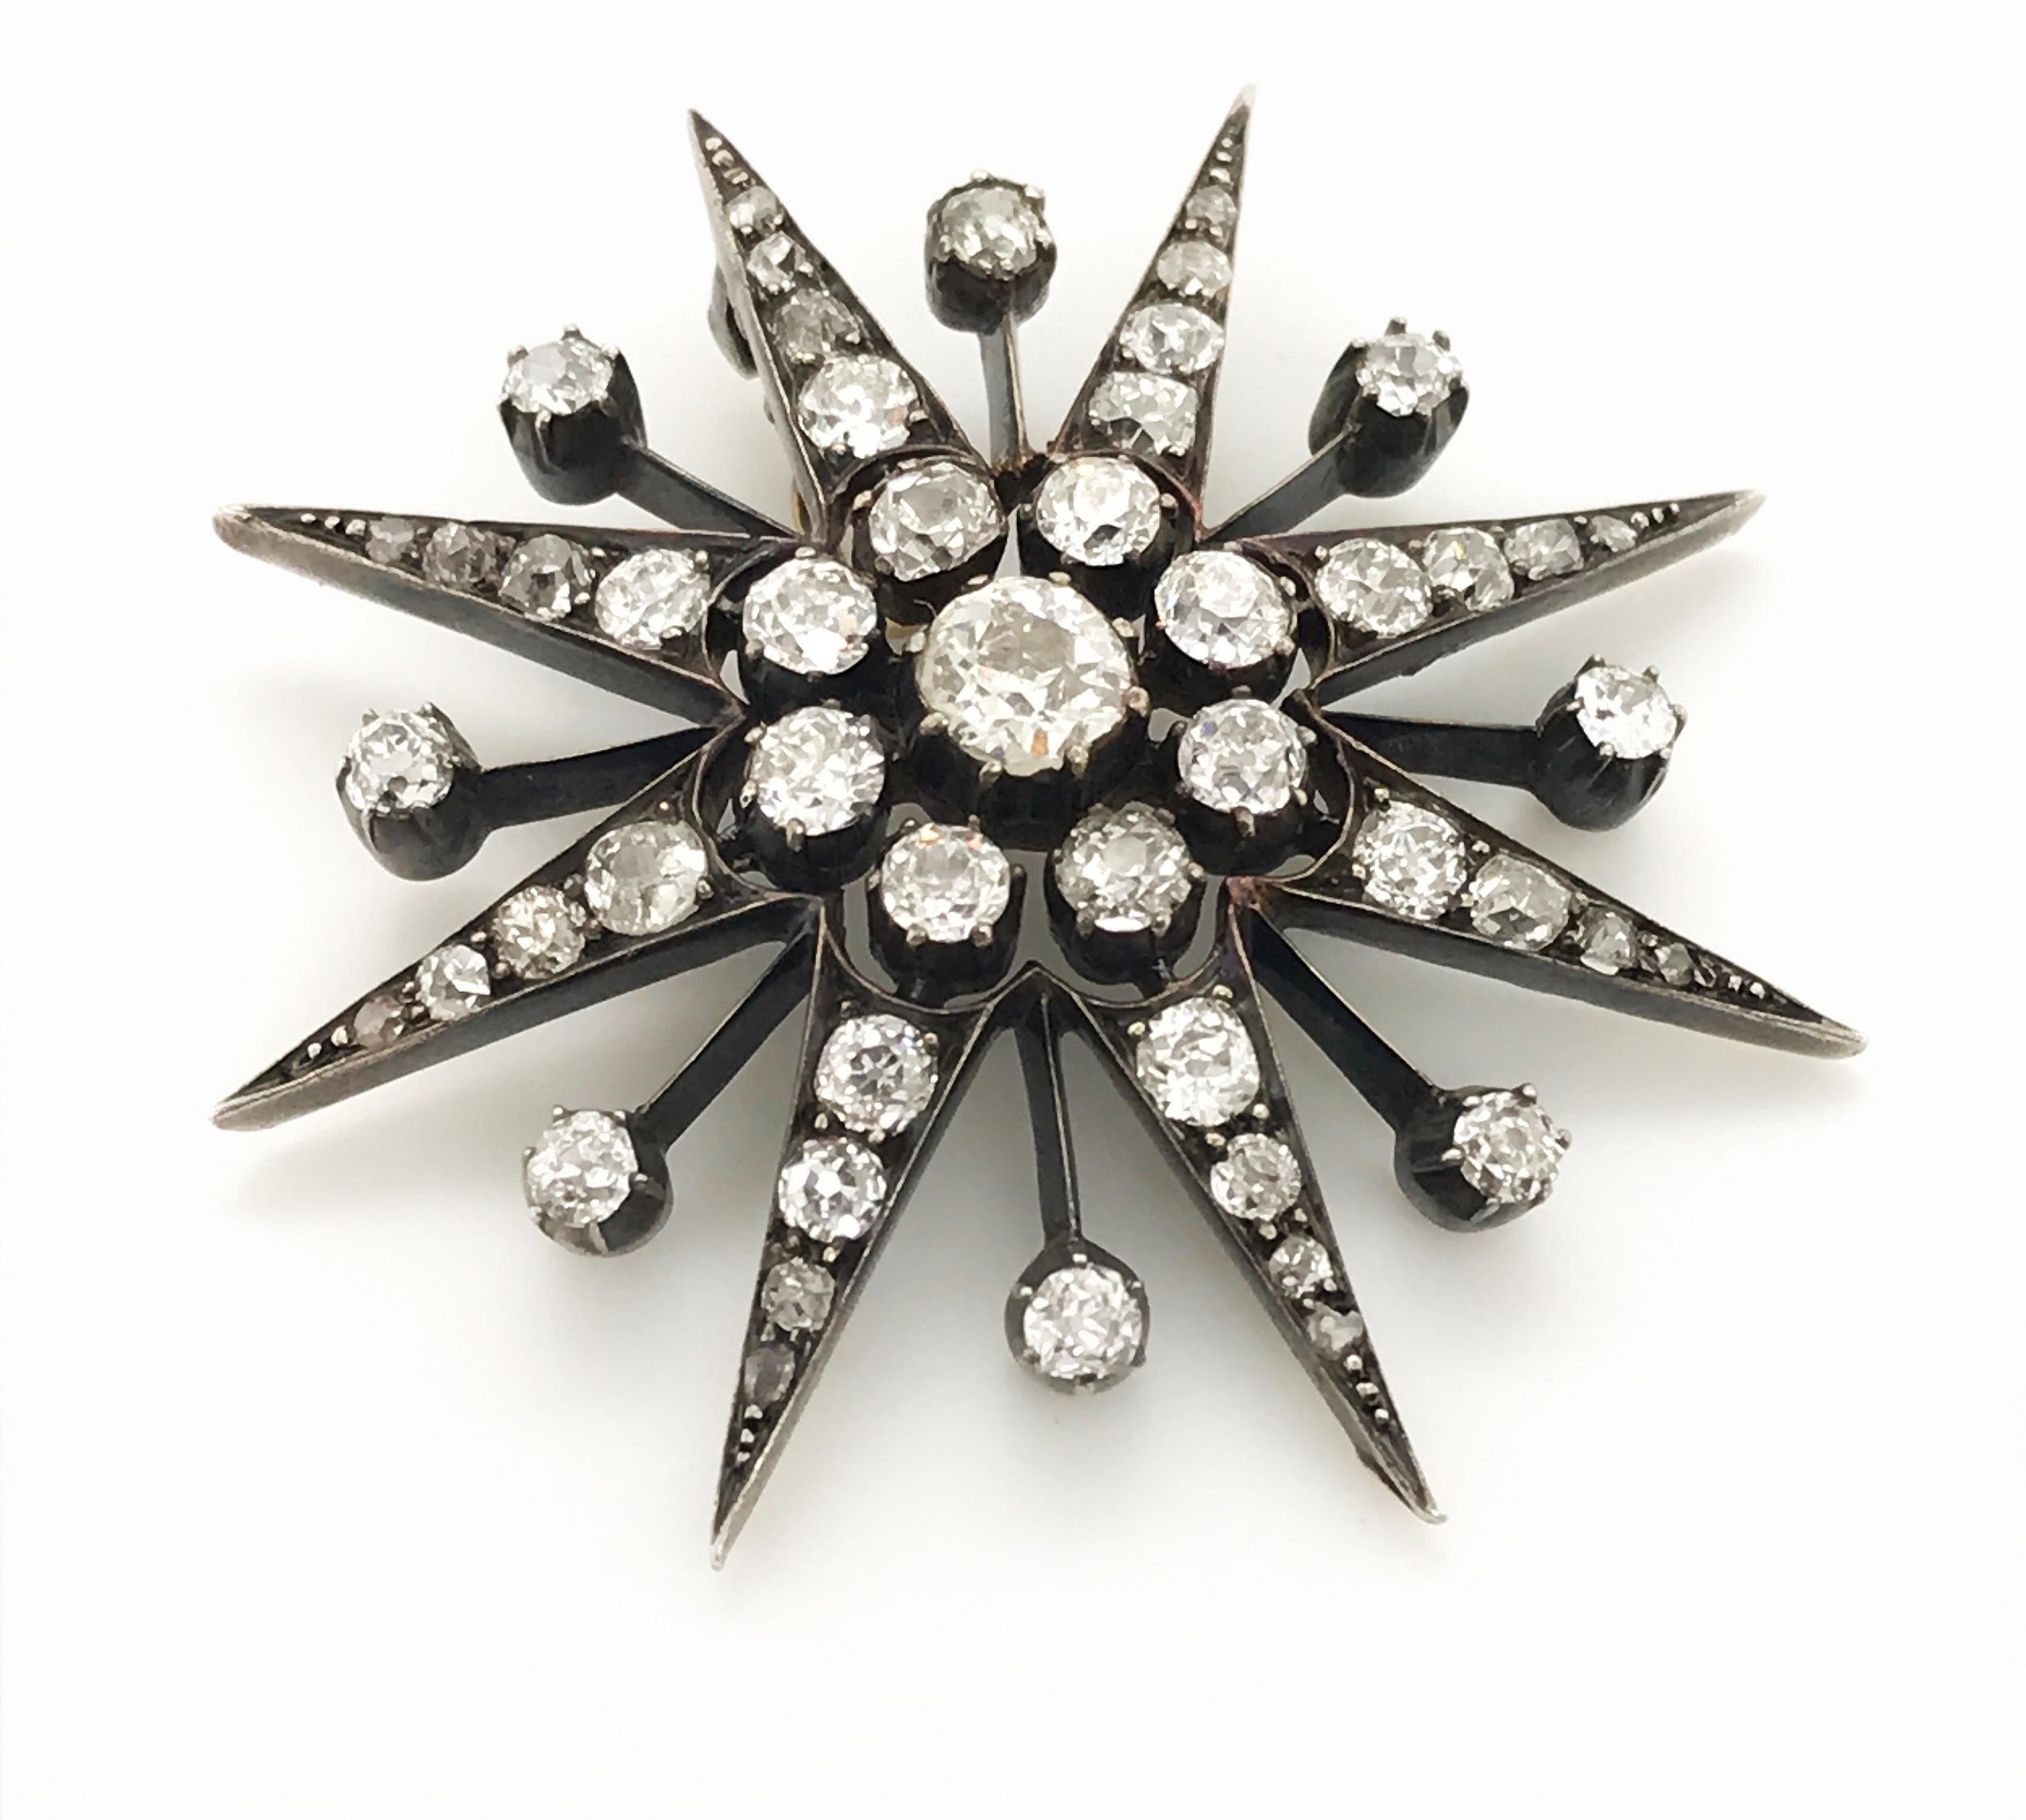 An original Victorian piece estimated to be from the early 1900's and looks just as fashionable today. Increasingly popular starburst brooches are making a big comeback, some in their original form as brooches and pendants but they are also being